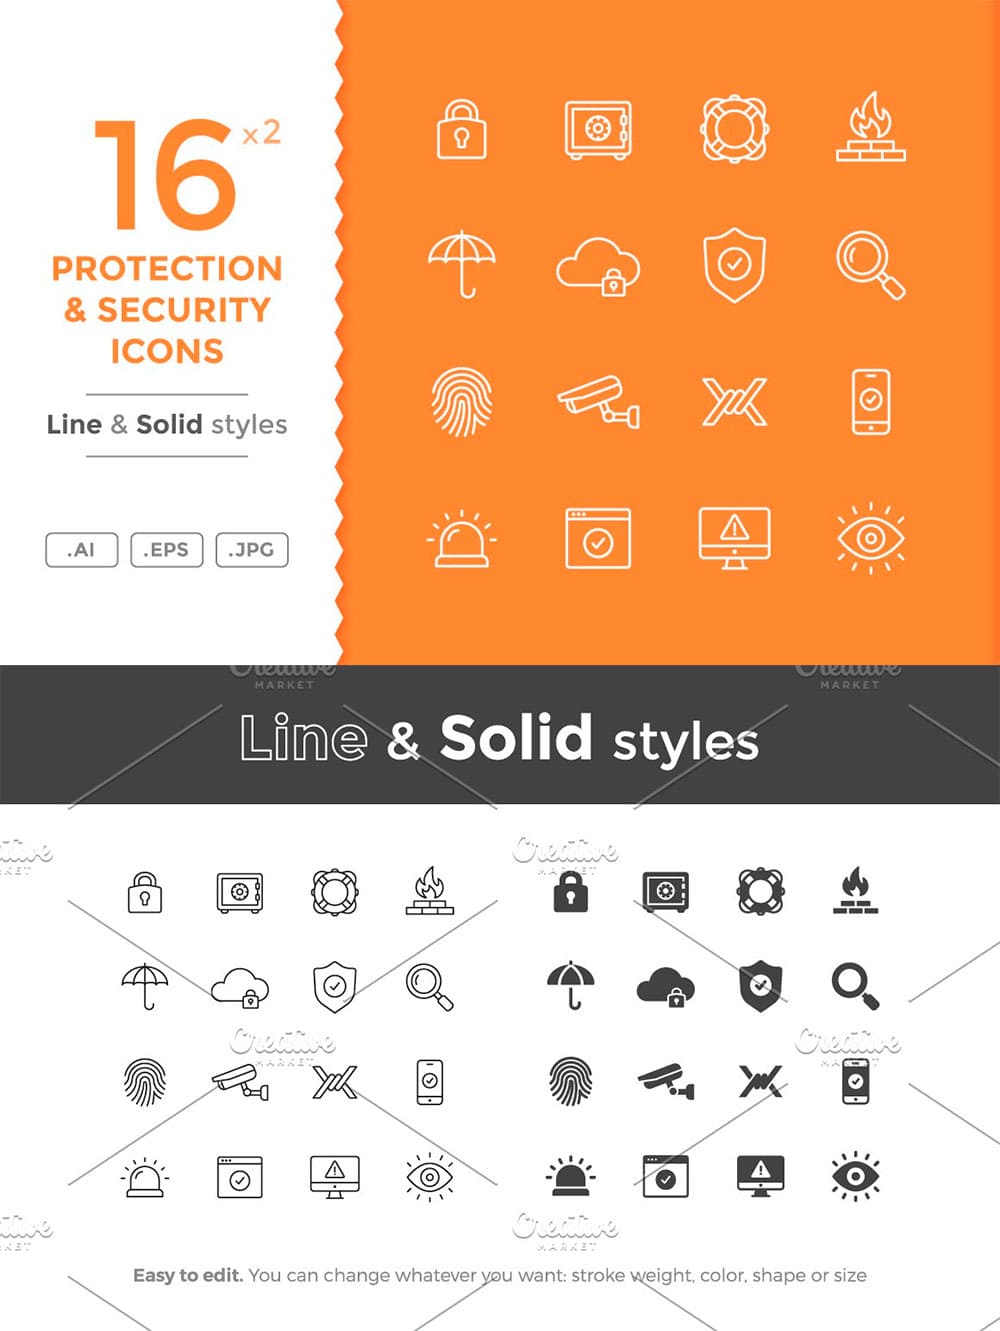 Protection and security icons, picture for pinterest.